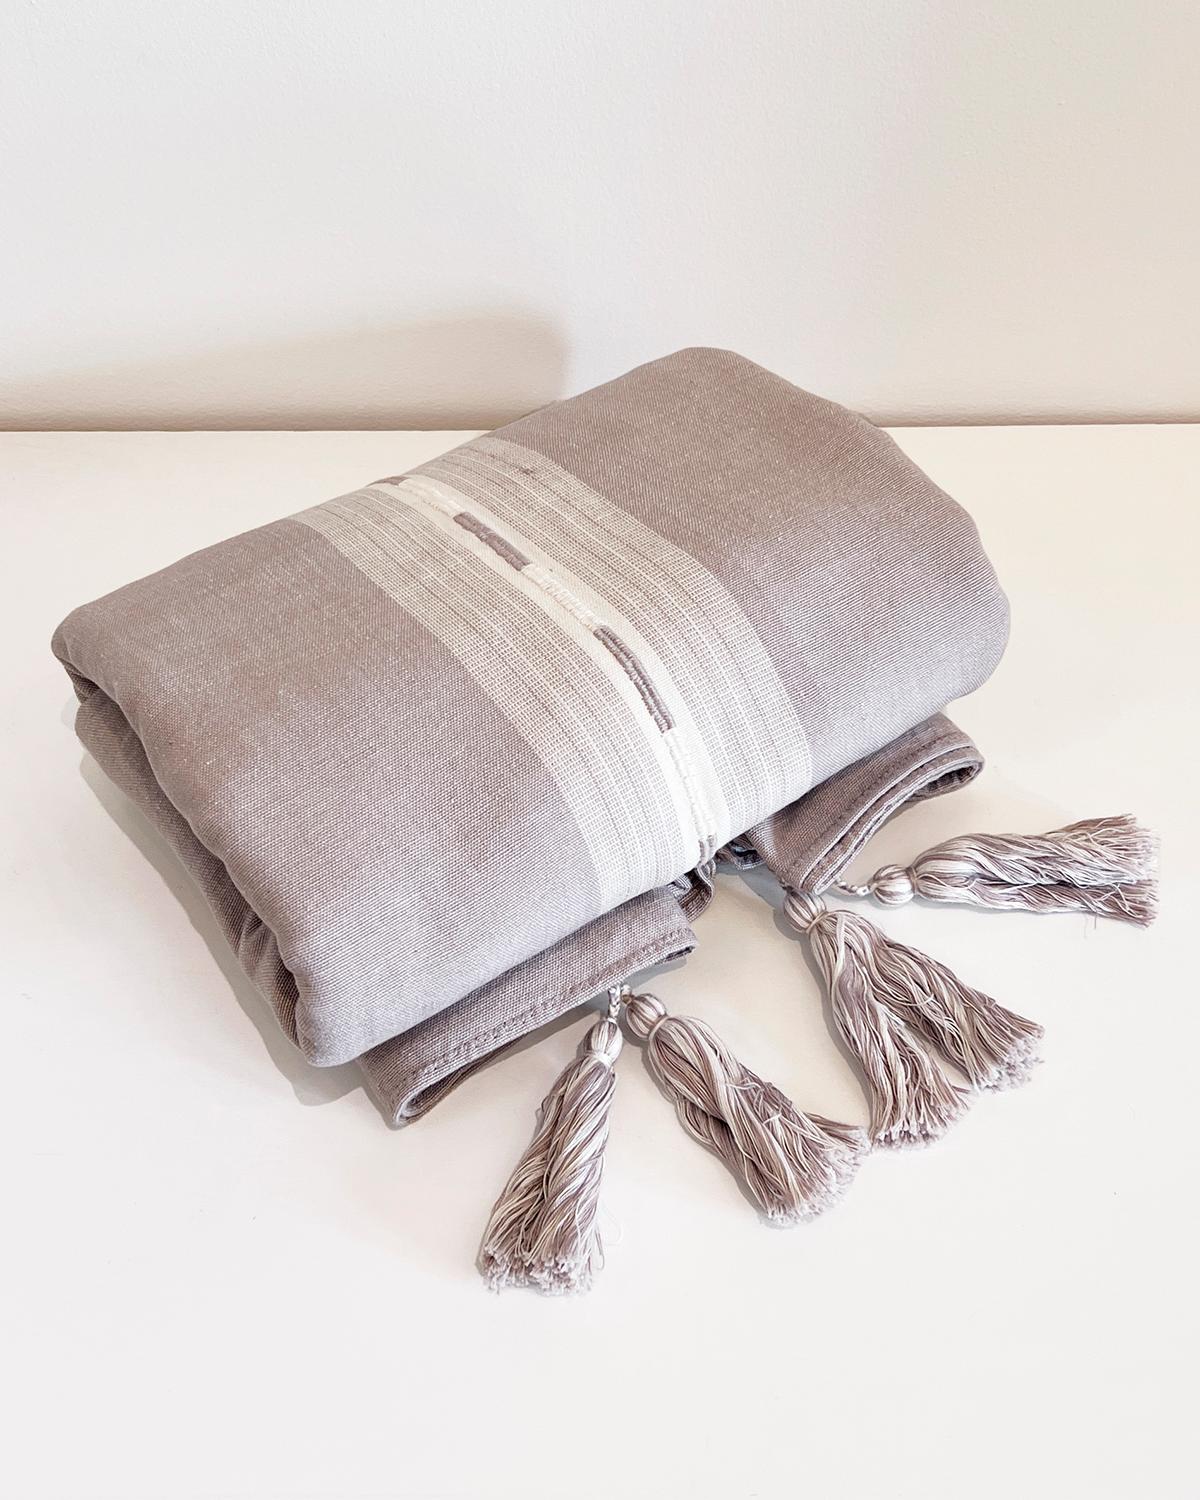 Hand-Woven SanCri Handmade Cotton Tablecloth in Gray and White with Pompoms For Sale